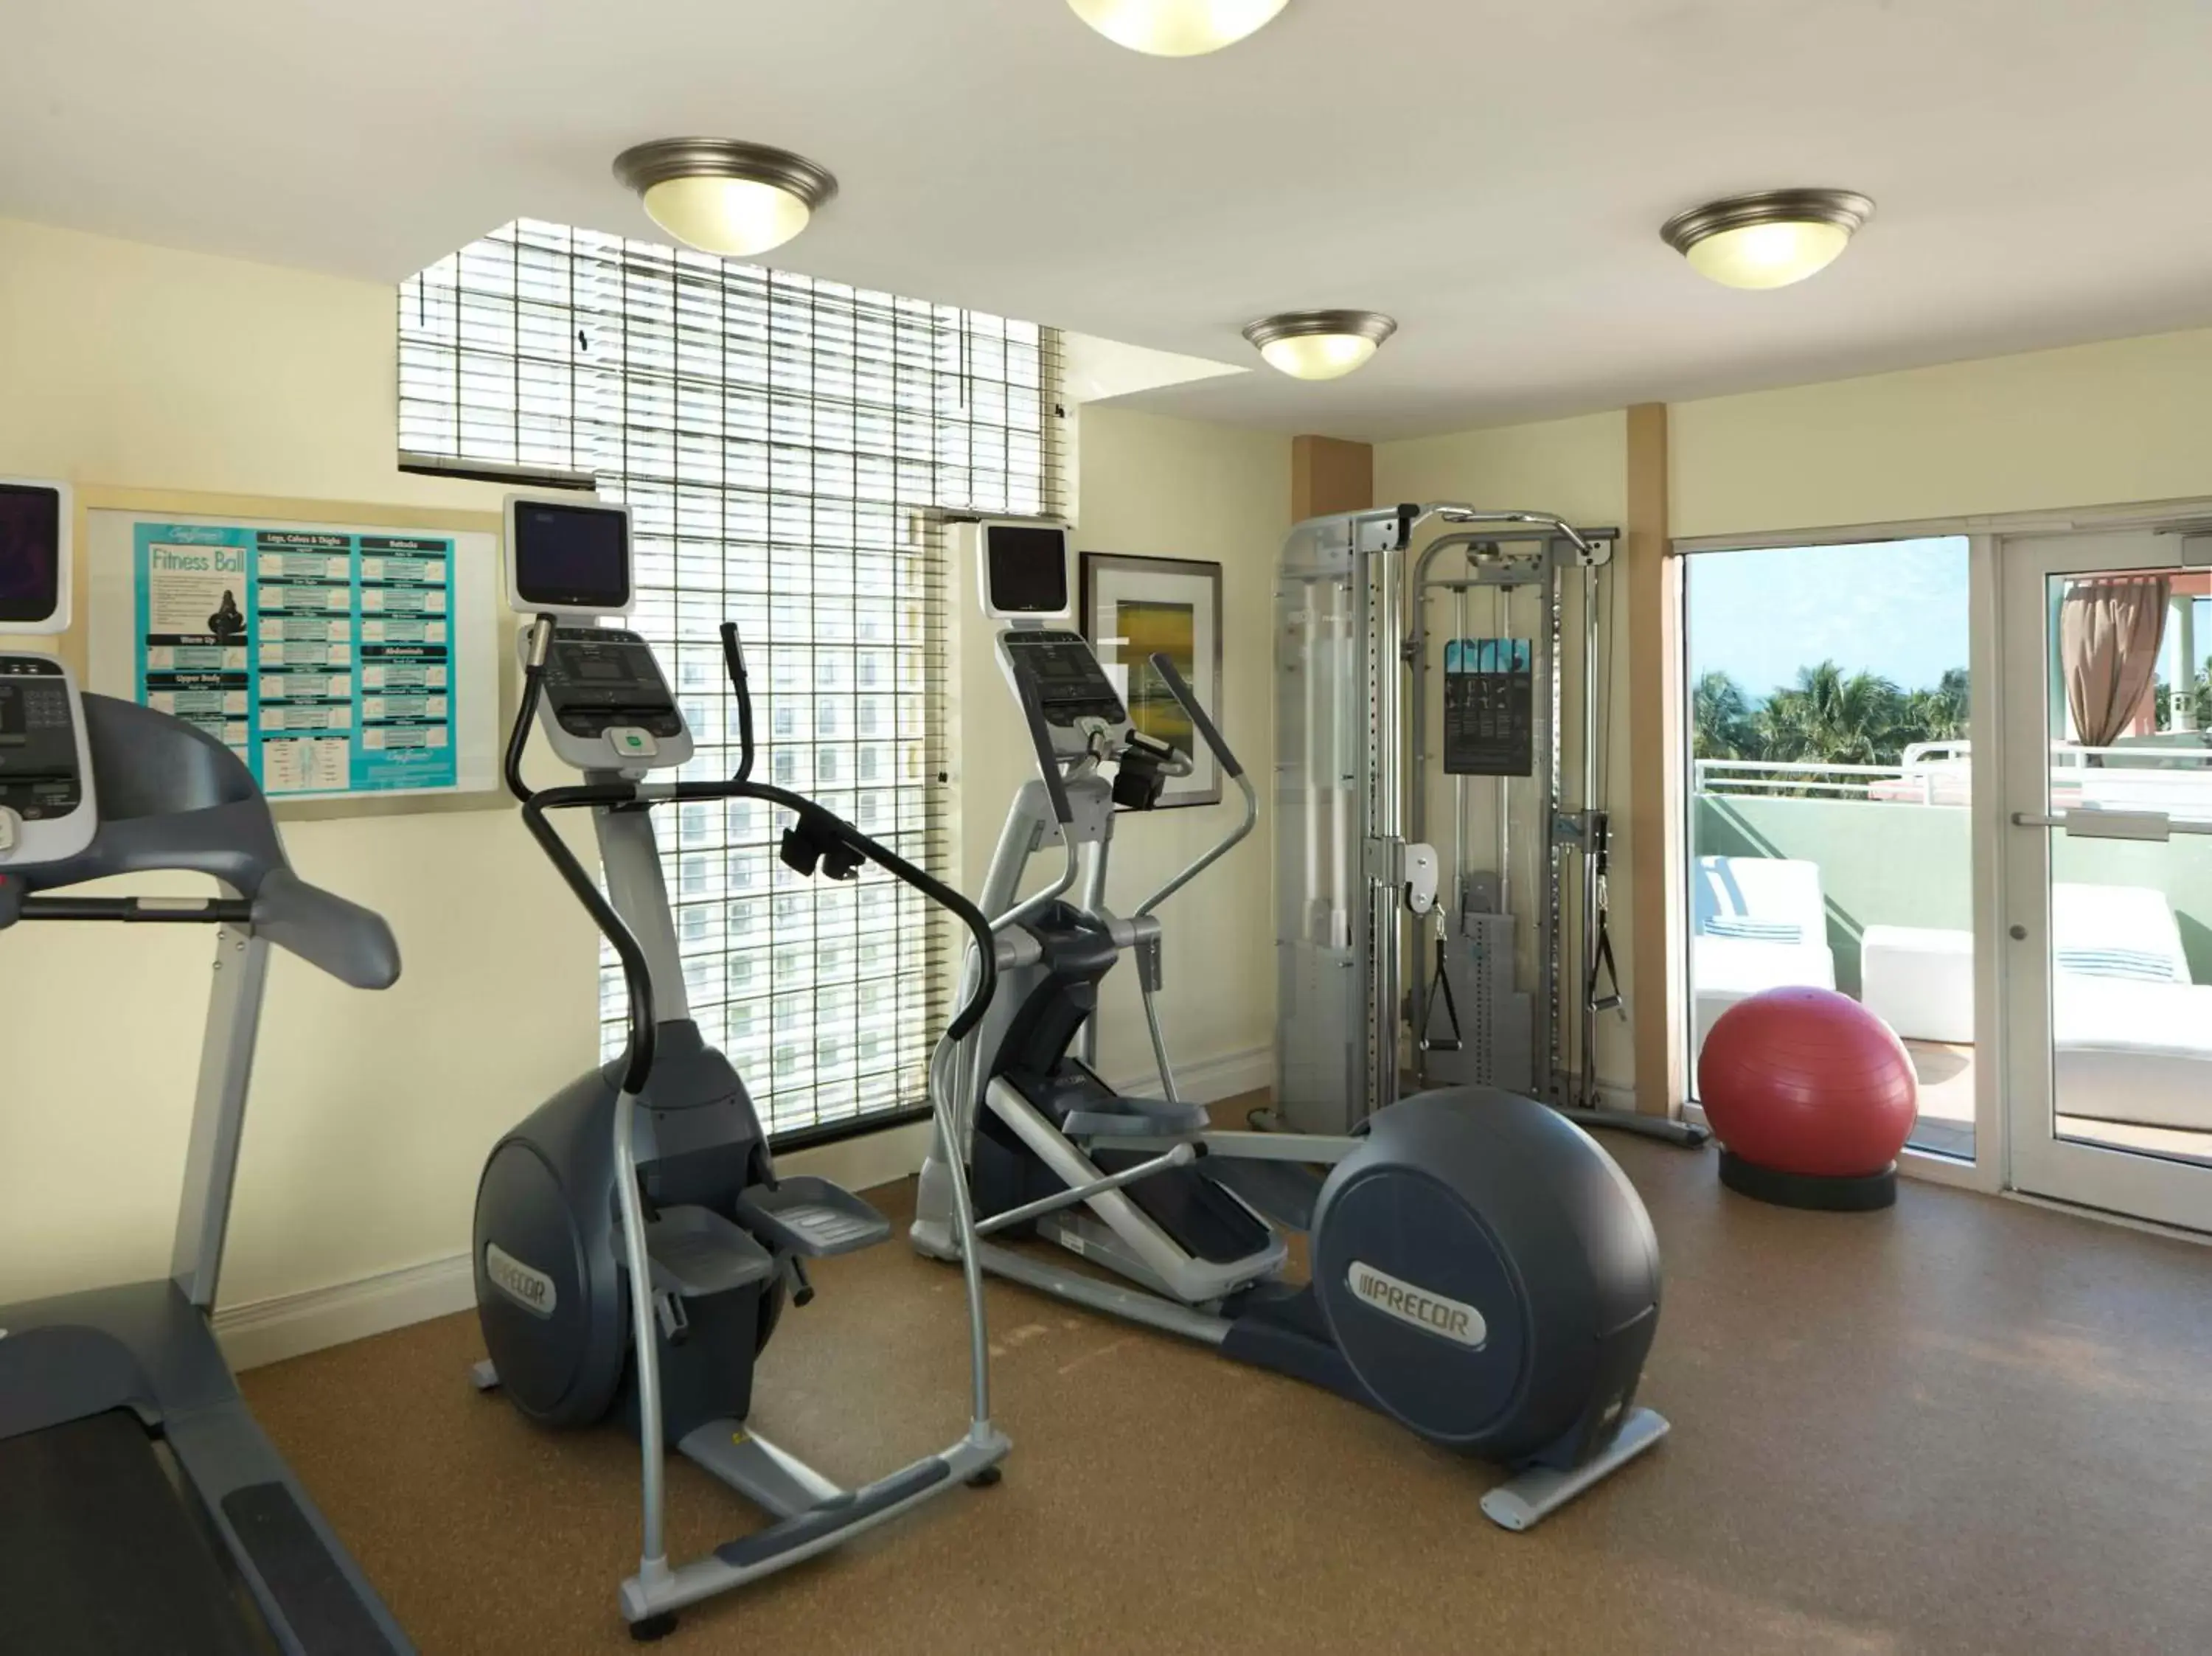 Fitness centre/facilities, Fitness Center/Facilities in Hilton Vacation Club Crescent on South Beach Miami